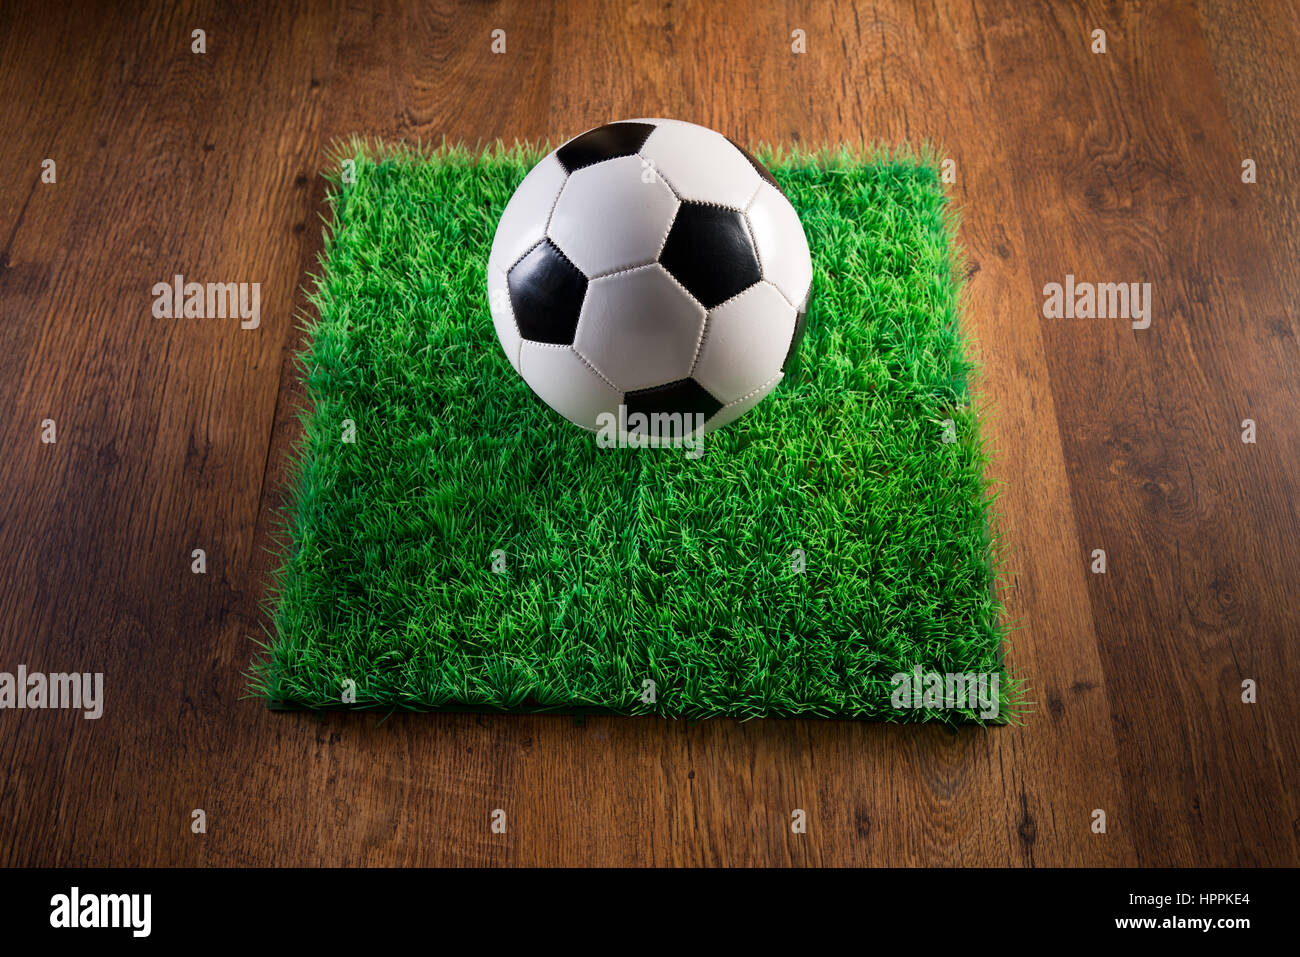 Soccer ball and artificial grass patch on hardwood floor. Stock Photo